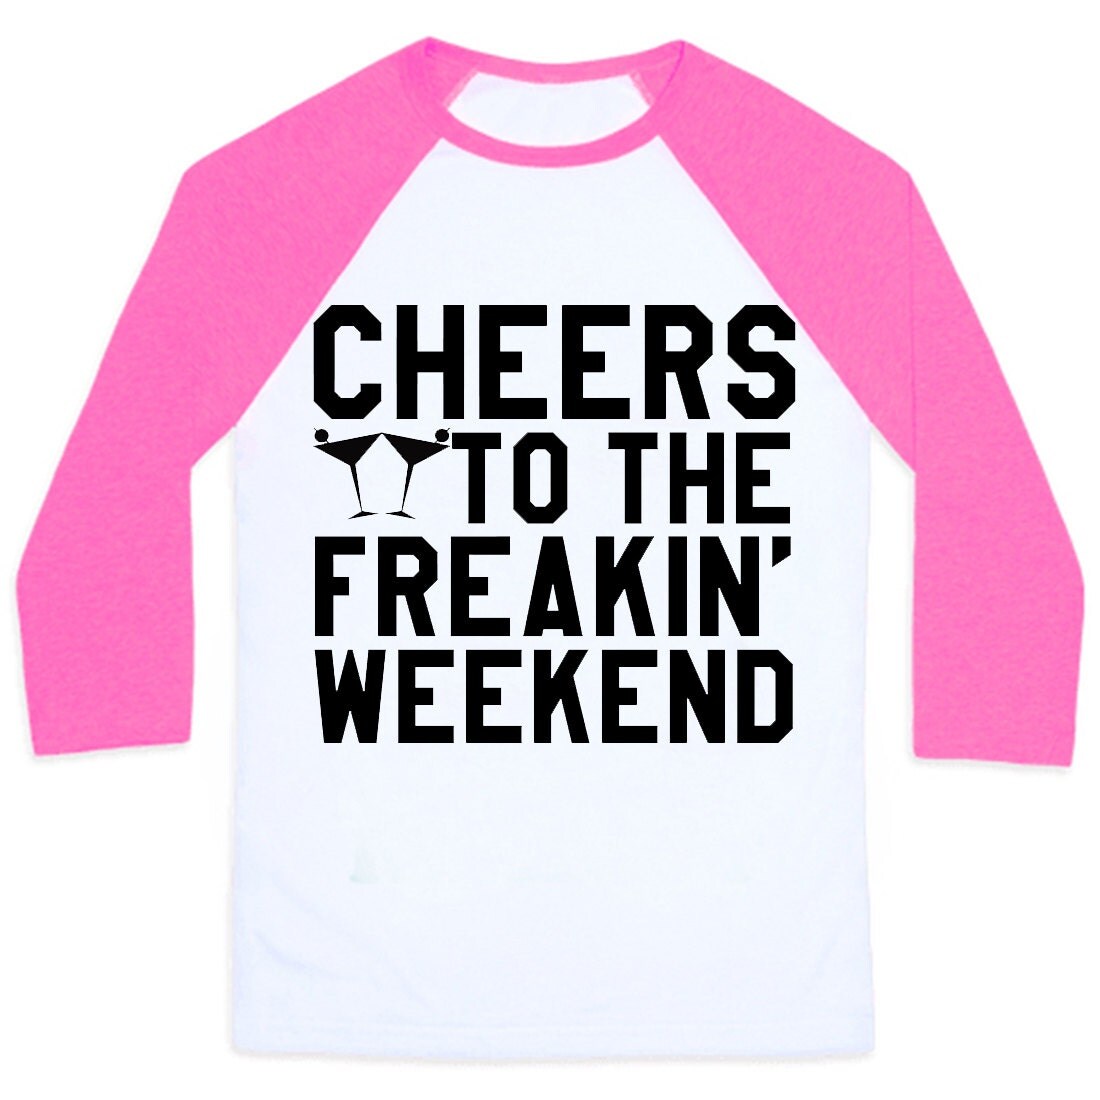 cheers to the freakin weekend meaning.mp3 download